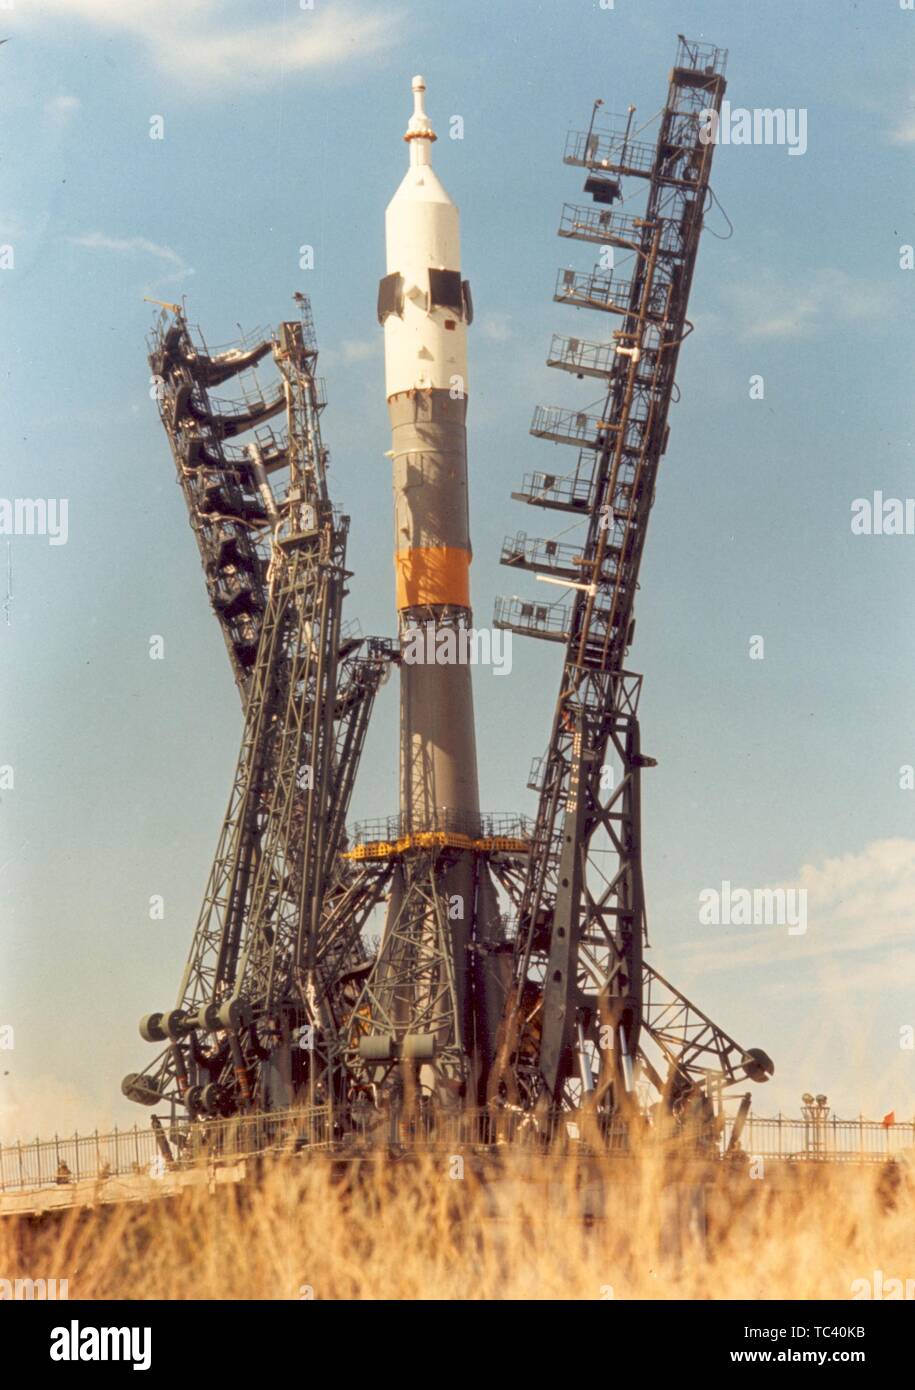 Soyuz spacecraft and launch vehicle installation on the launch pad, Apollo-Soyuz Test Project (ASTP), Baikonur complex in Kazakhstan, July, 1975. Image courtesy National Aeronautics and Space Administration (NASA). () Stock Photo